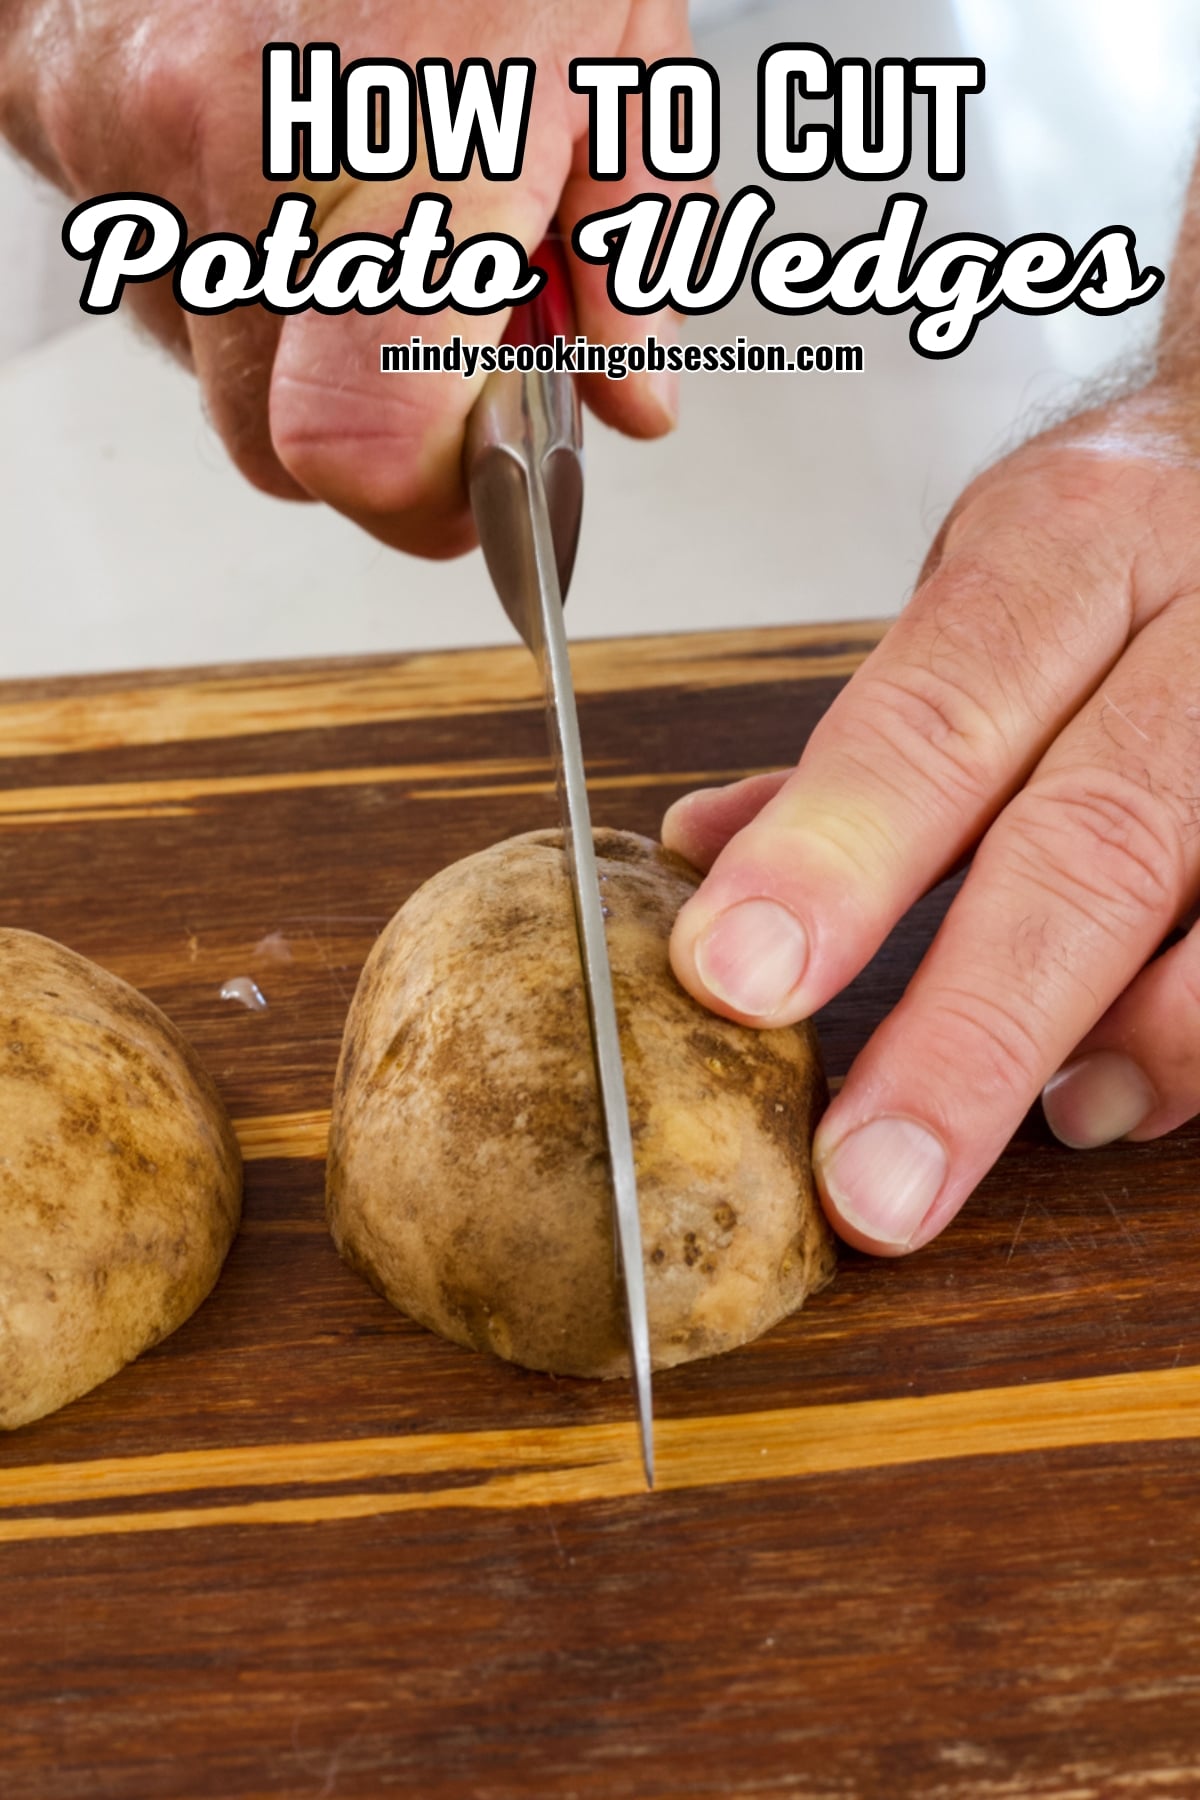 How to Cut Potato Wedges (simple step-by-step guide) for a healthy, easy and delicious side dish. So much easier that cutting French fries! via @mindyscookingobsession